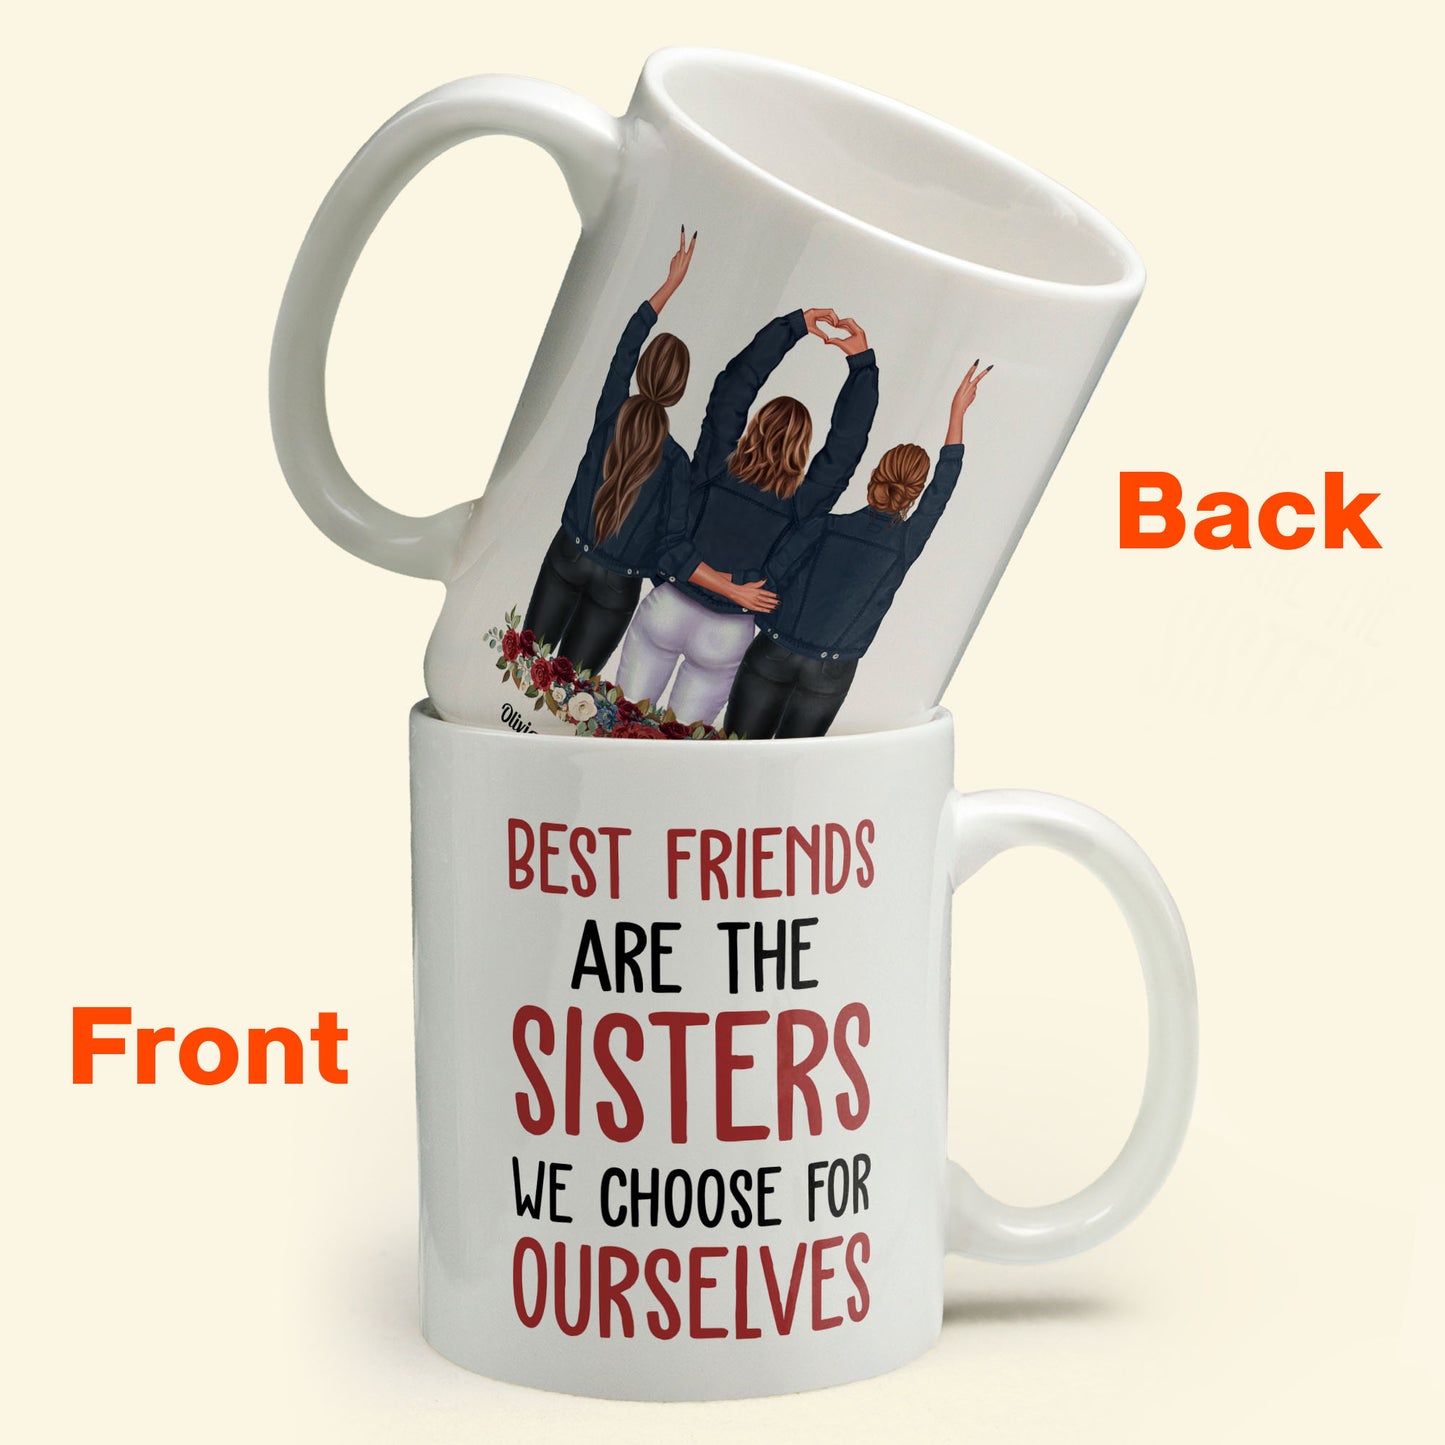 Best Friends Are The Sisters We Choose For Ourselves - Personalized Mug - Birthday, Christmas Gift For Her, Friends, BFF, Besties, Best Friends, Soul Sisters